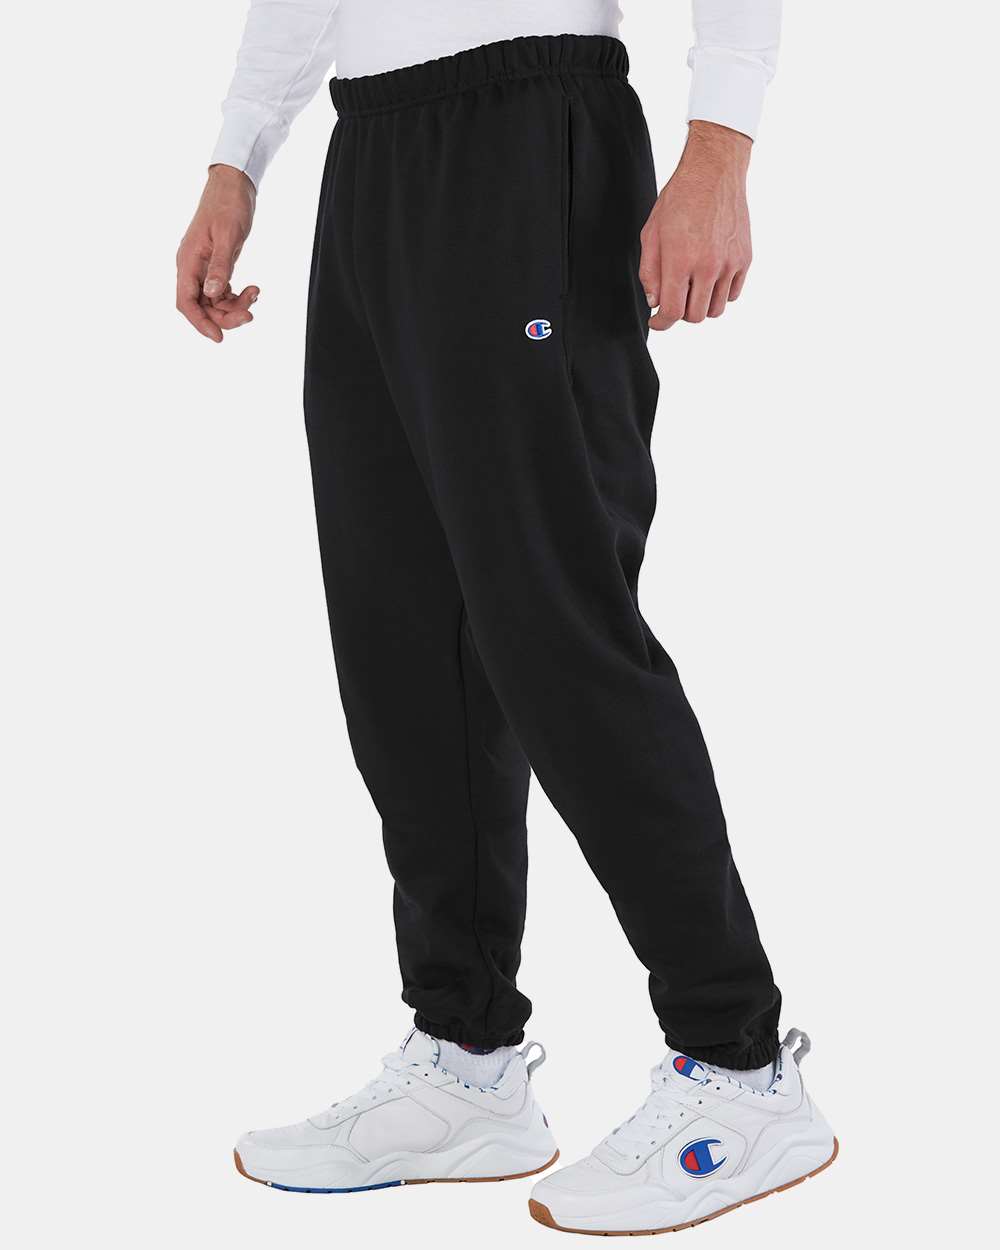 Champion Reverse Weave Sweatpants with Pockets RW10 S-3XL NEW